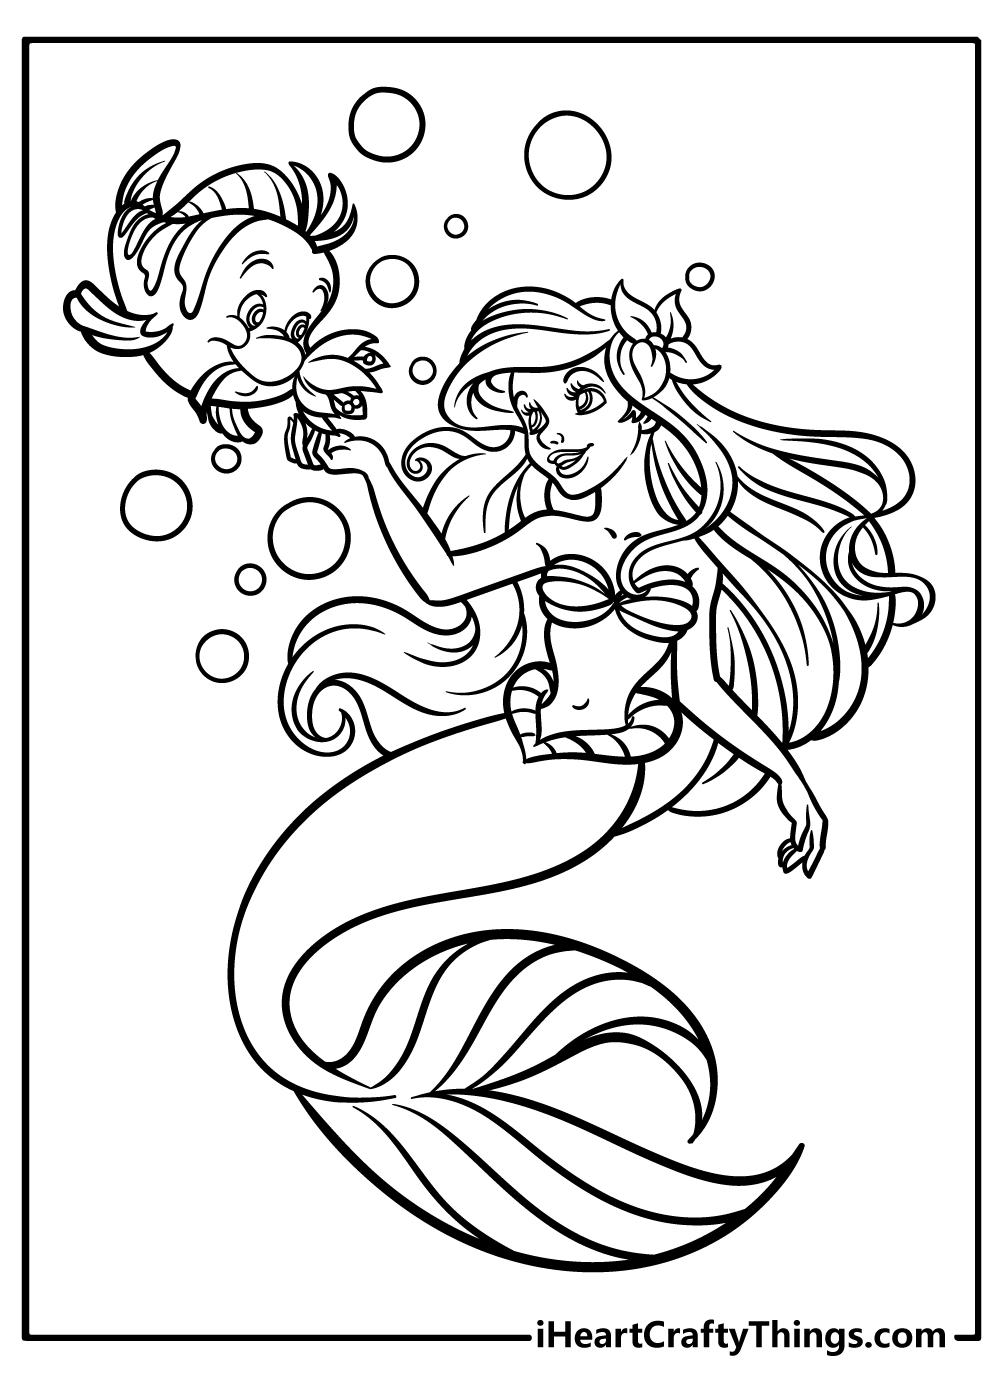 Printable Ariel Coloring Pages Updated 21